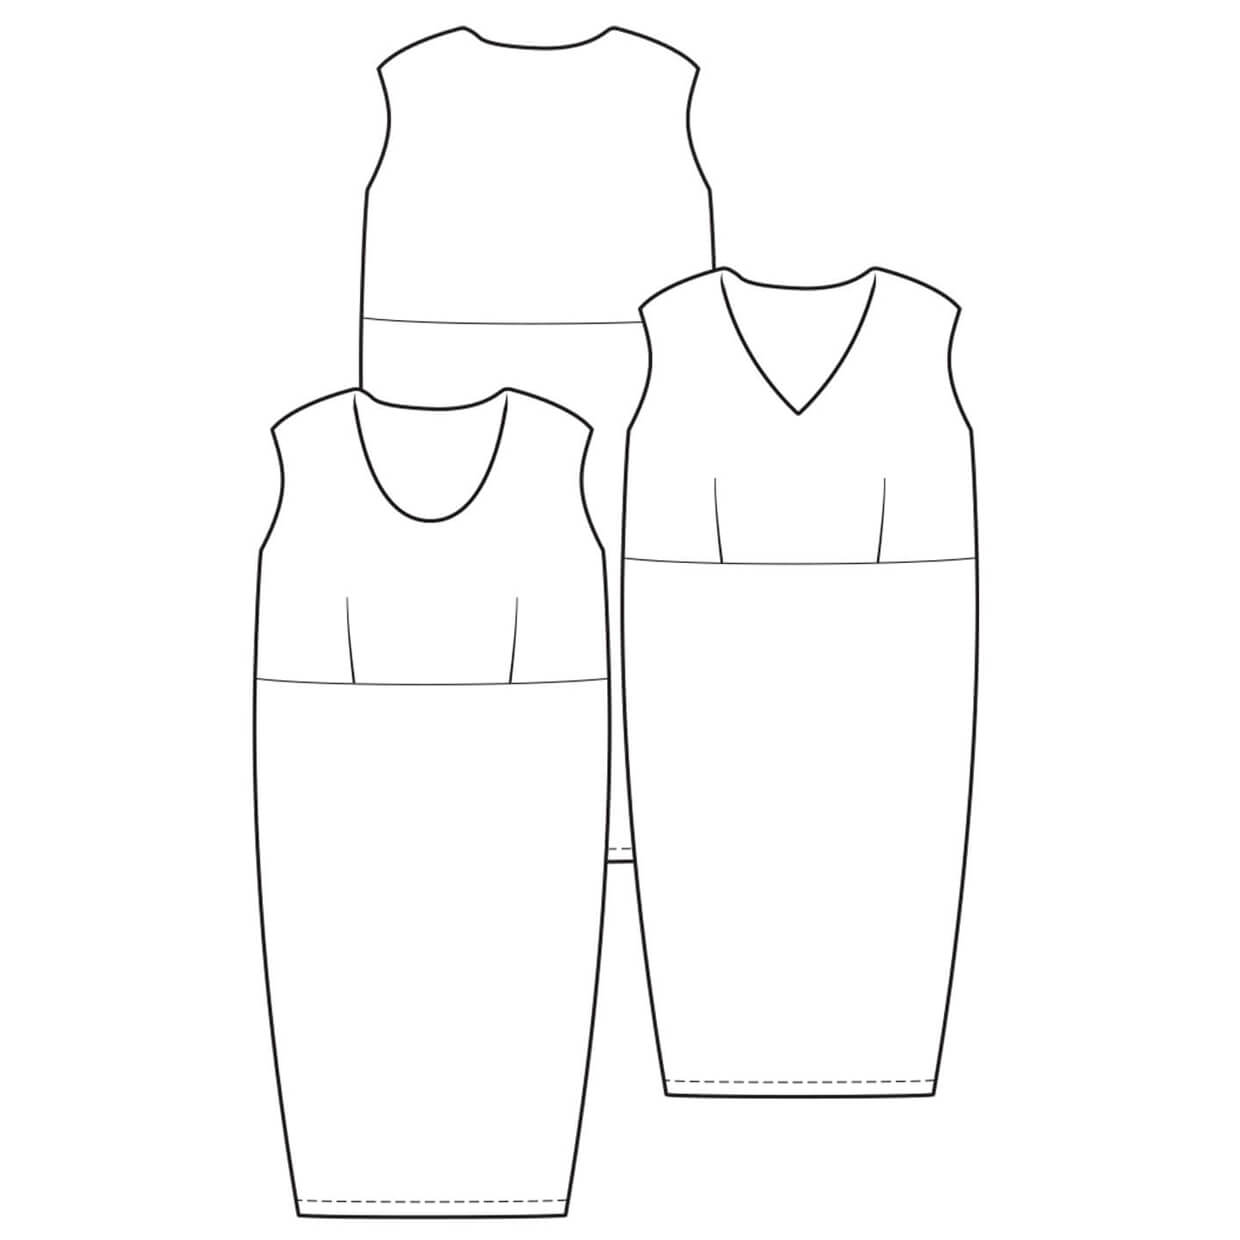 Slip dress Images  Search Images on Everypixel